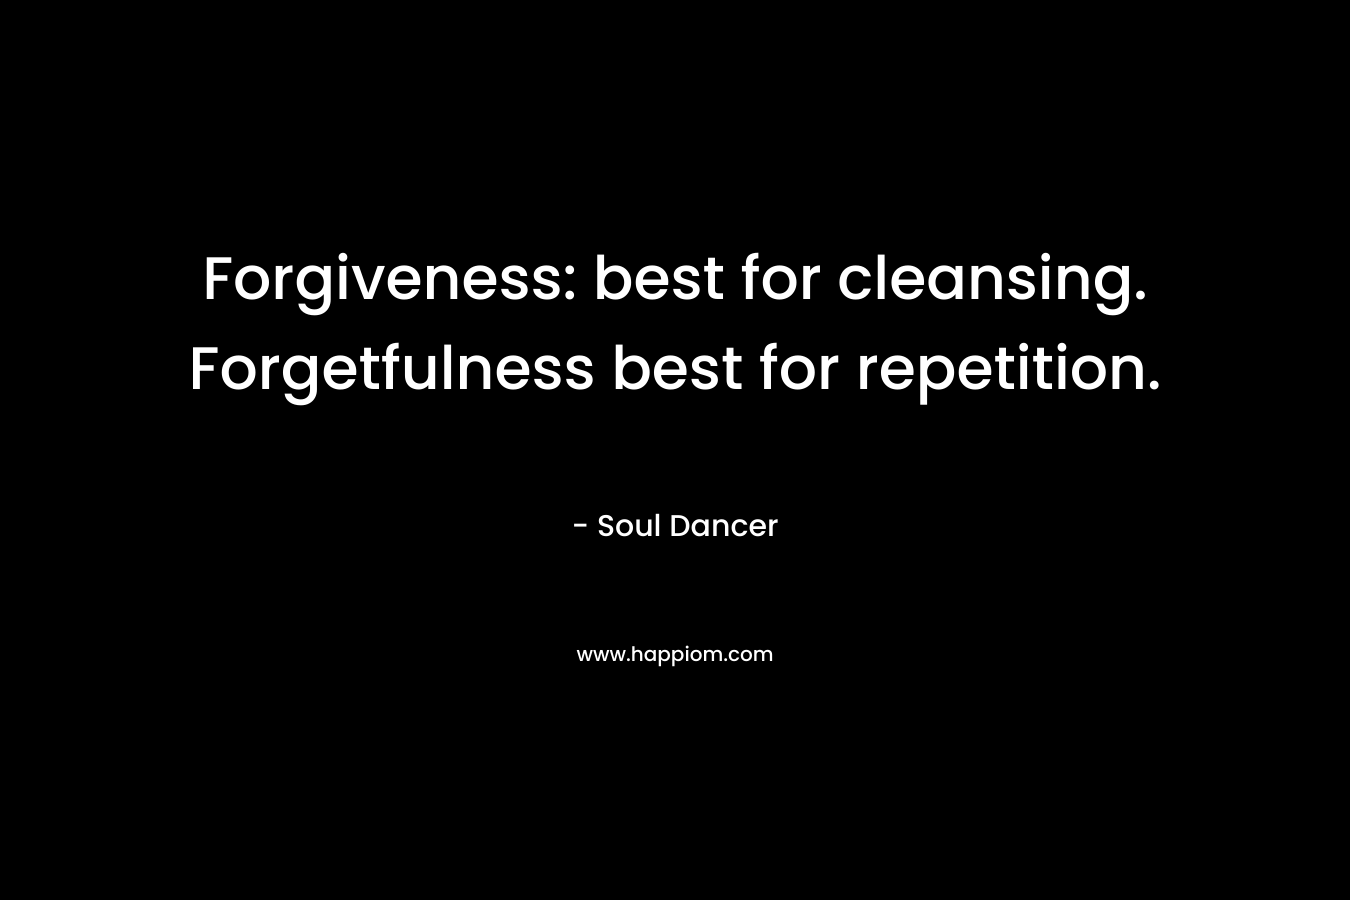 Forgiveness: best for cleansing. Forgetfulness best for repetition.